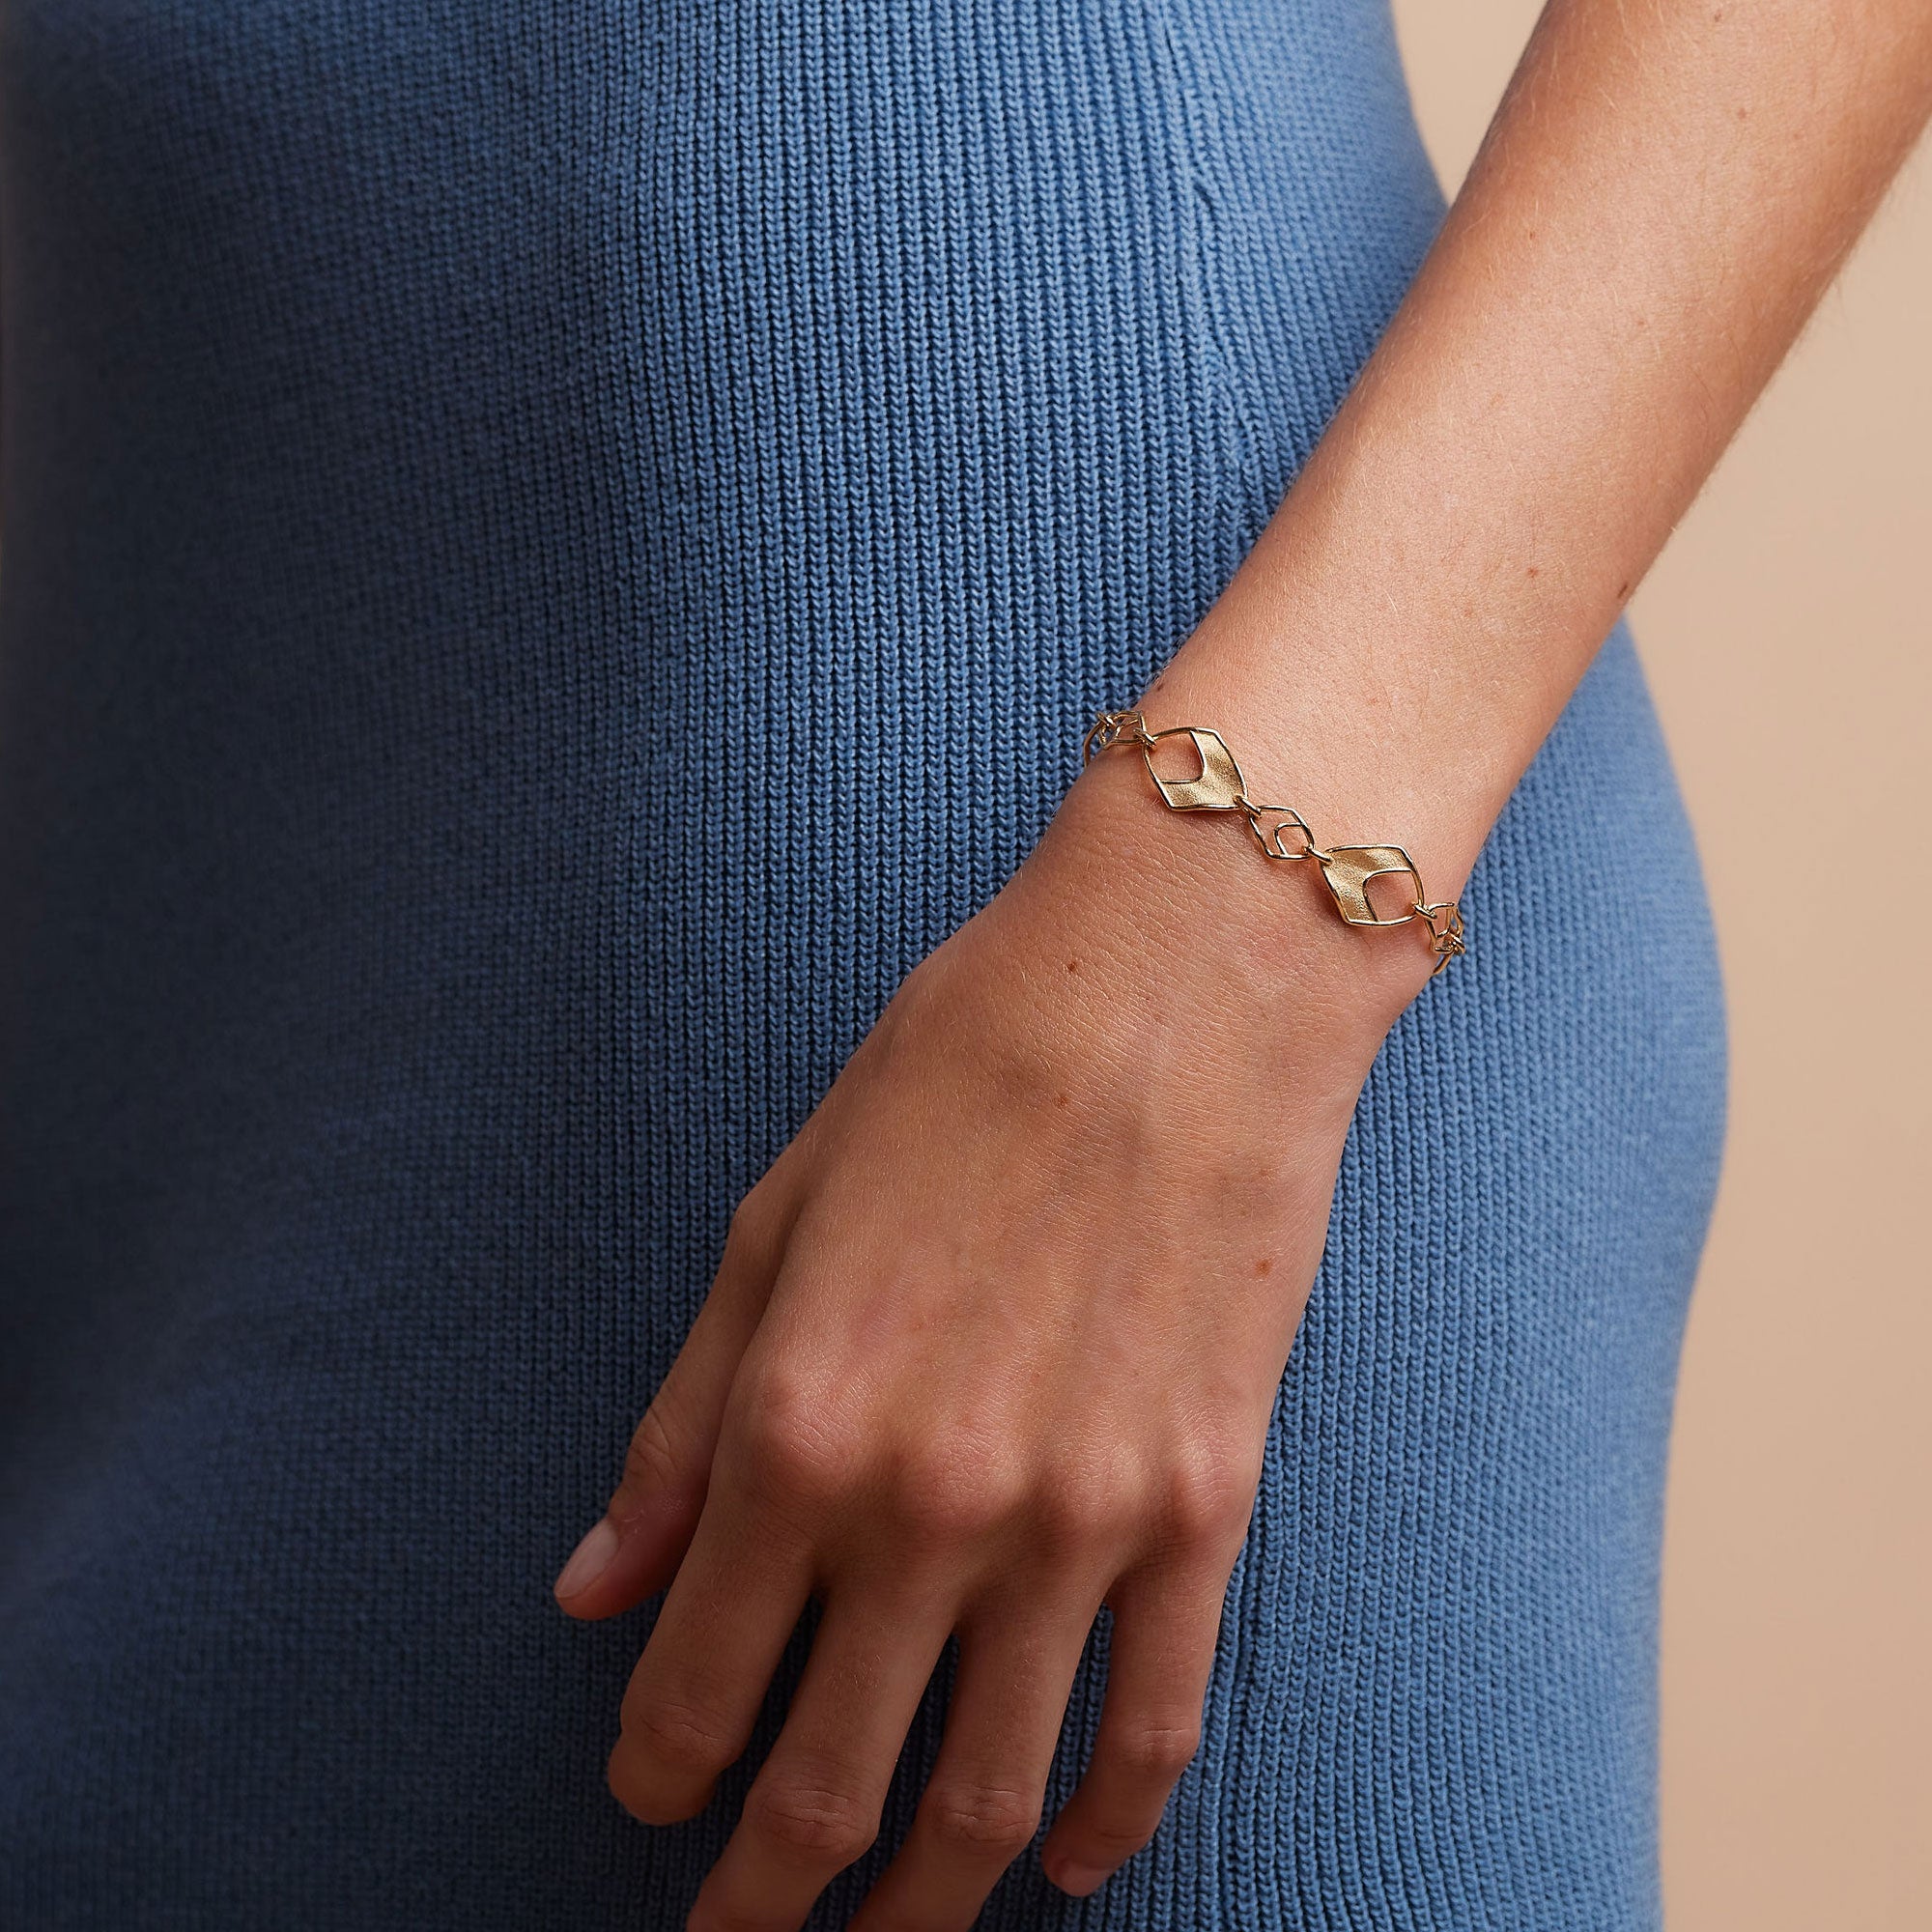 The Curve Linked Bracelet in 18k Yellow Gold